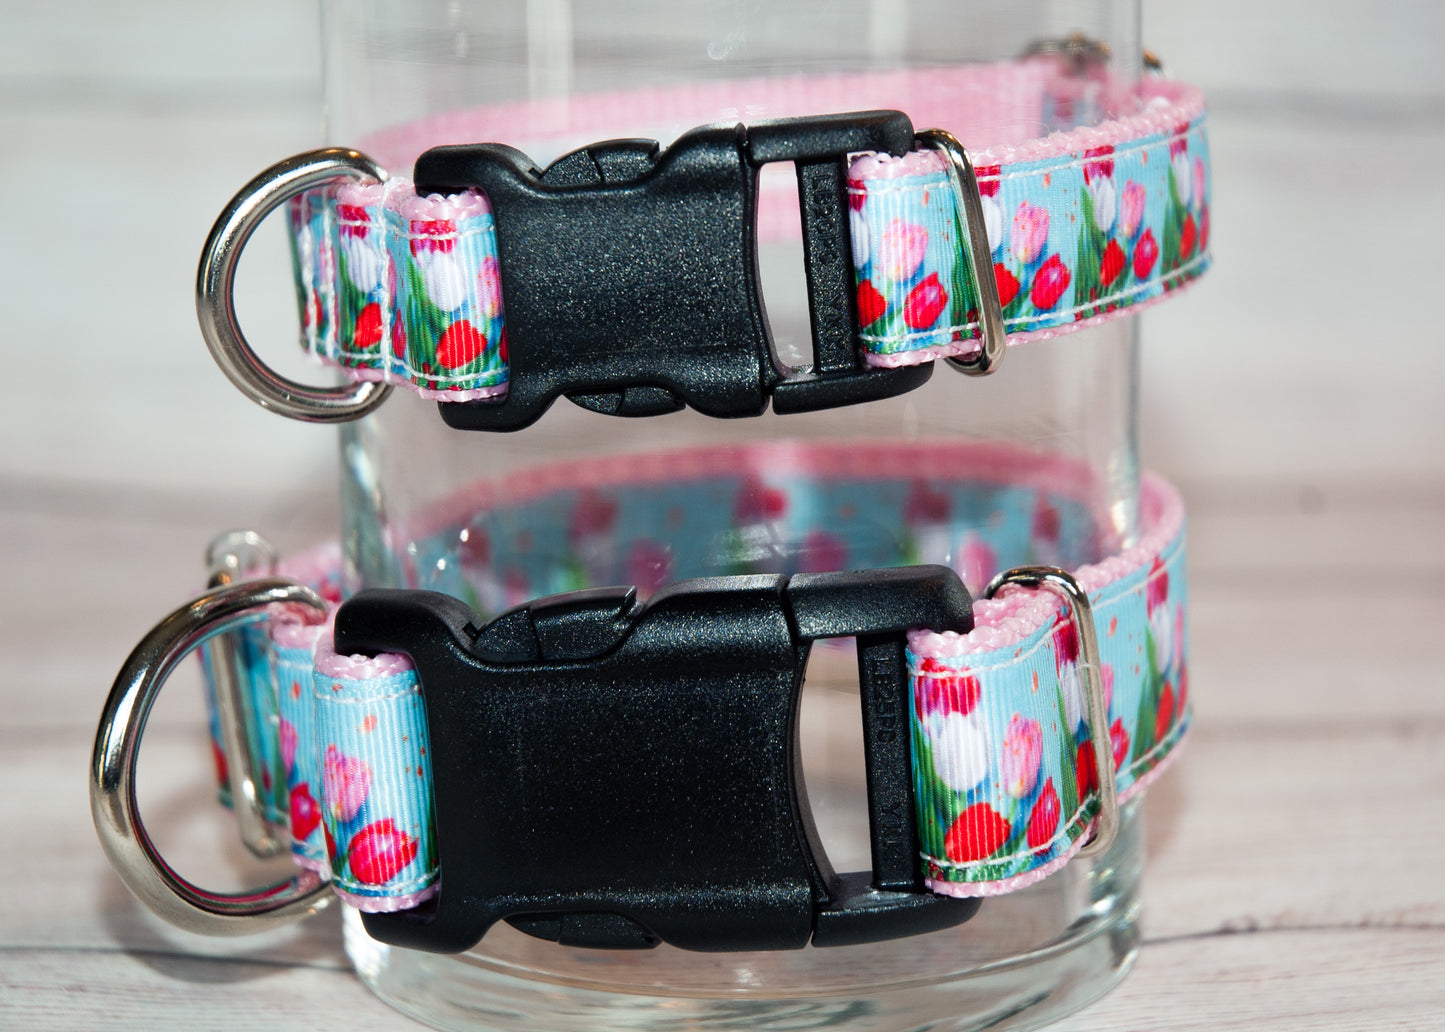 Beautiful Tulip dog collars, Flower dog collar, Floral dog collar, or leash 1"wide or 3/4" wide